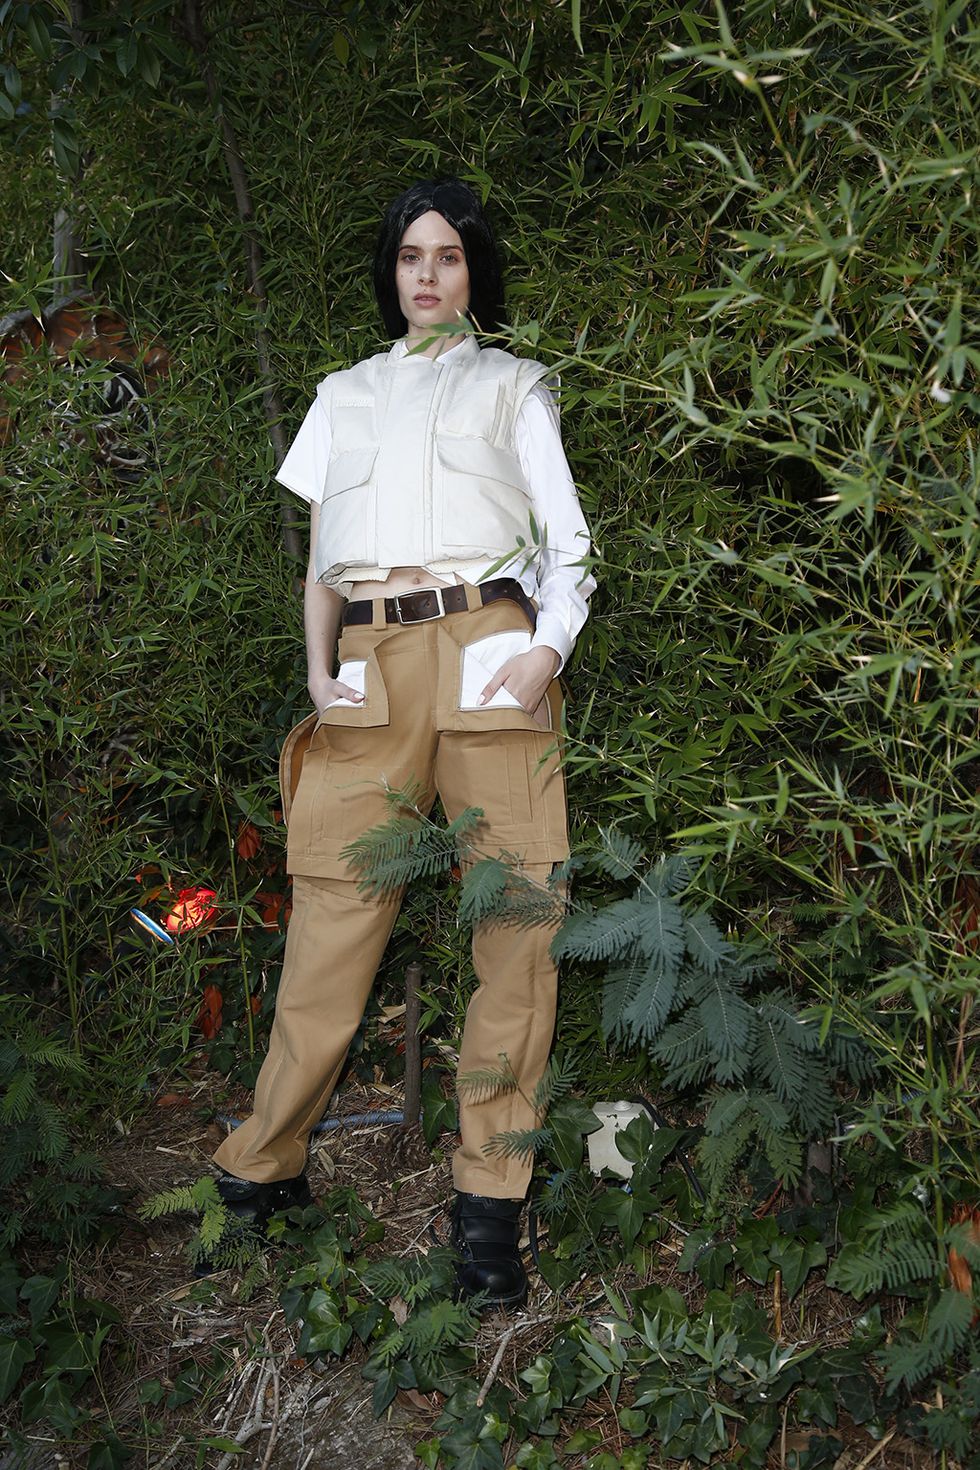 Outerwear, Footwear, Leg, Grass, Photography, Plant, Fawn, Costume, Trousers, 